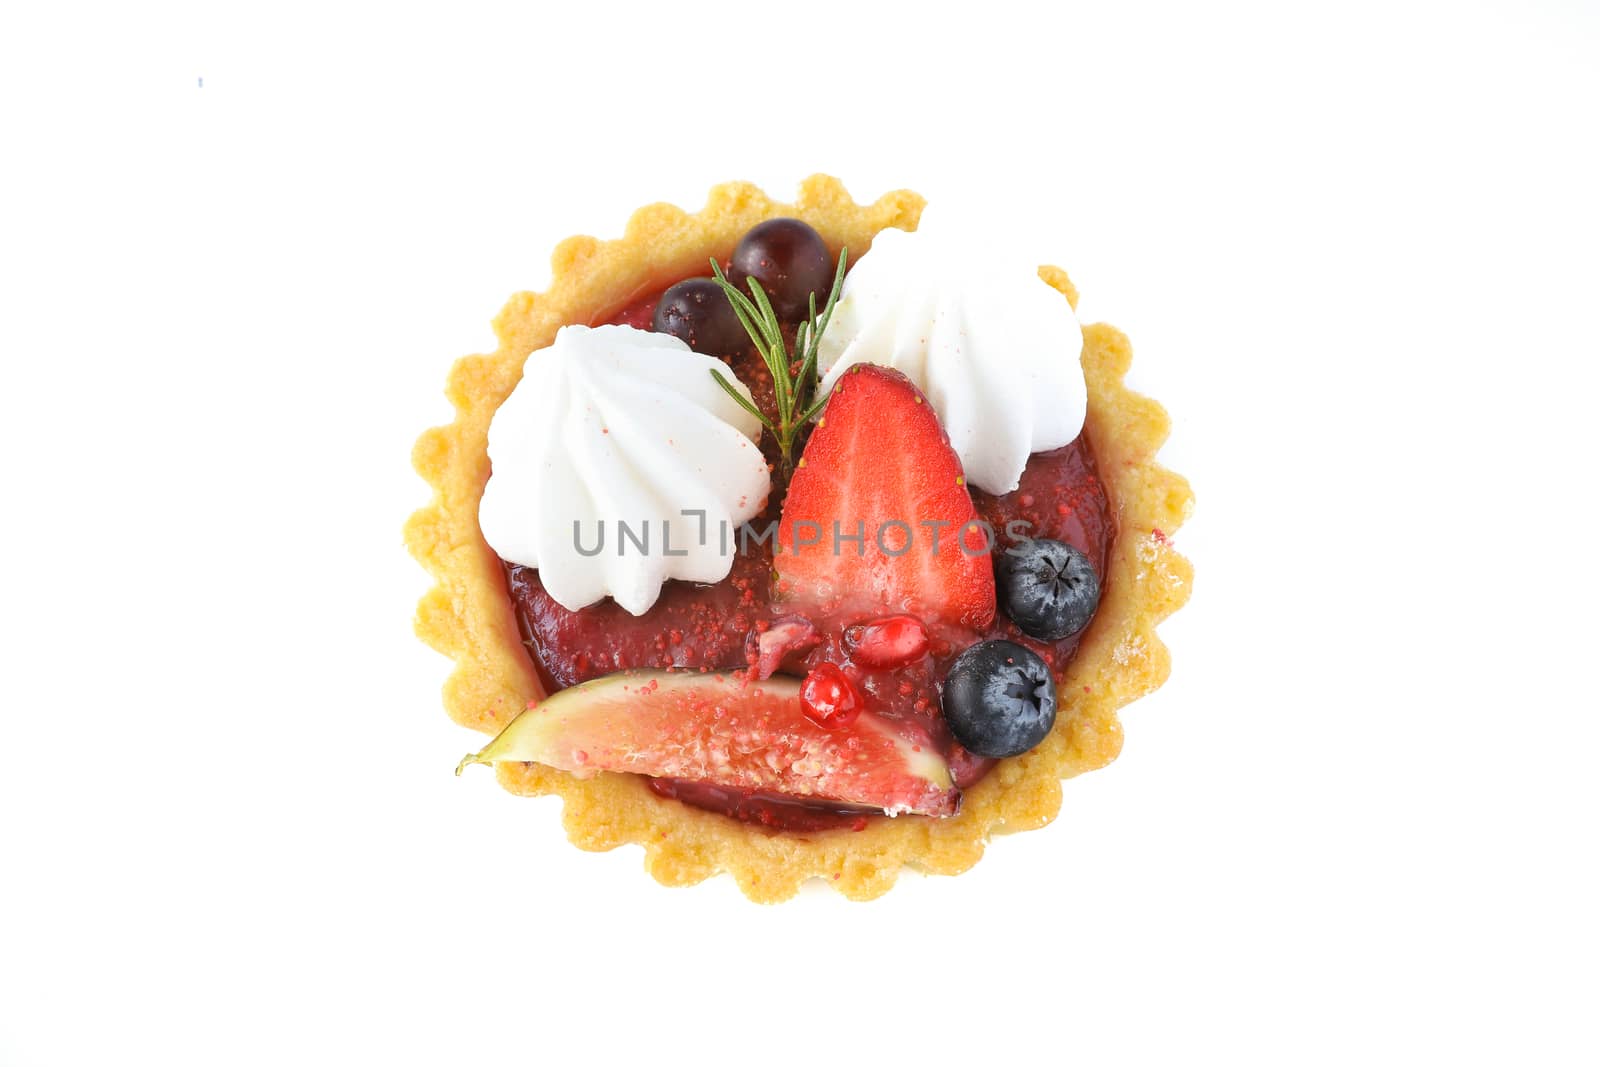 Mixed fruits tart with fig, promegranate, starfruit, cherry, blueberry, grape, and raspberry jam. A cup of tea, brown wooden background, top view.